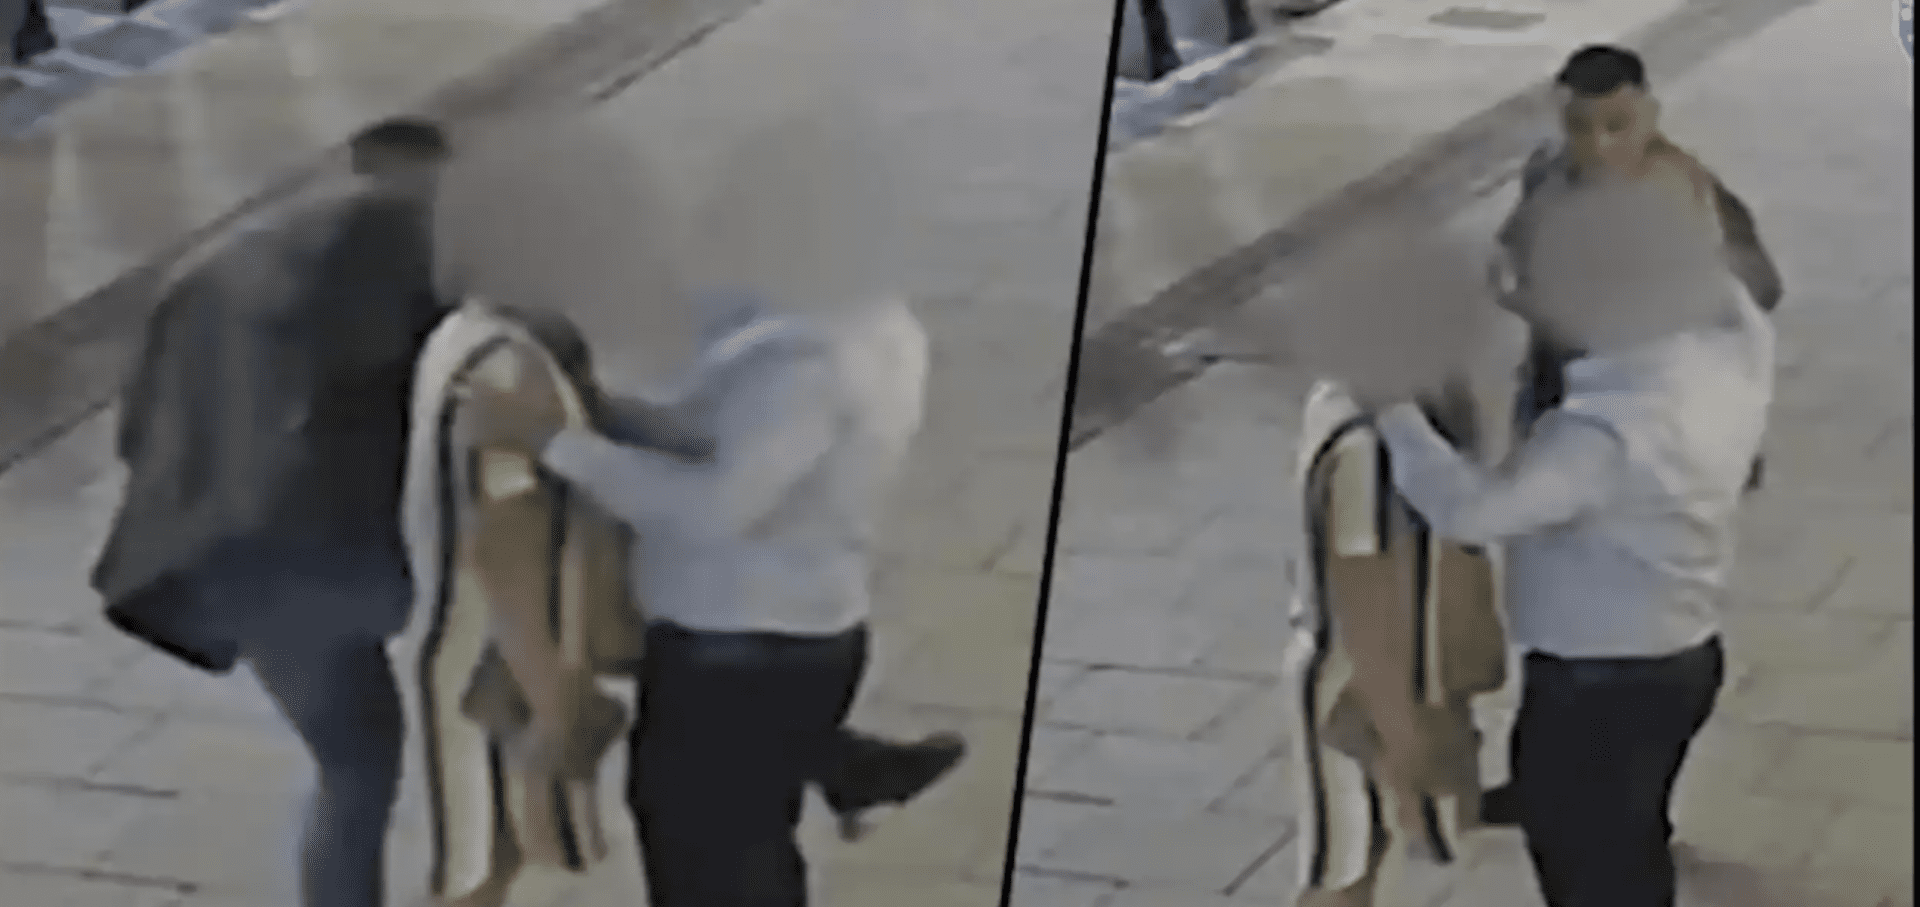 VIDEO: Street thief uses “bizarre dance” to steal woman’s Rolex